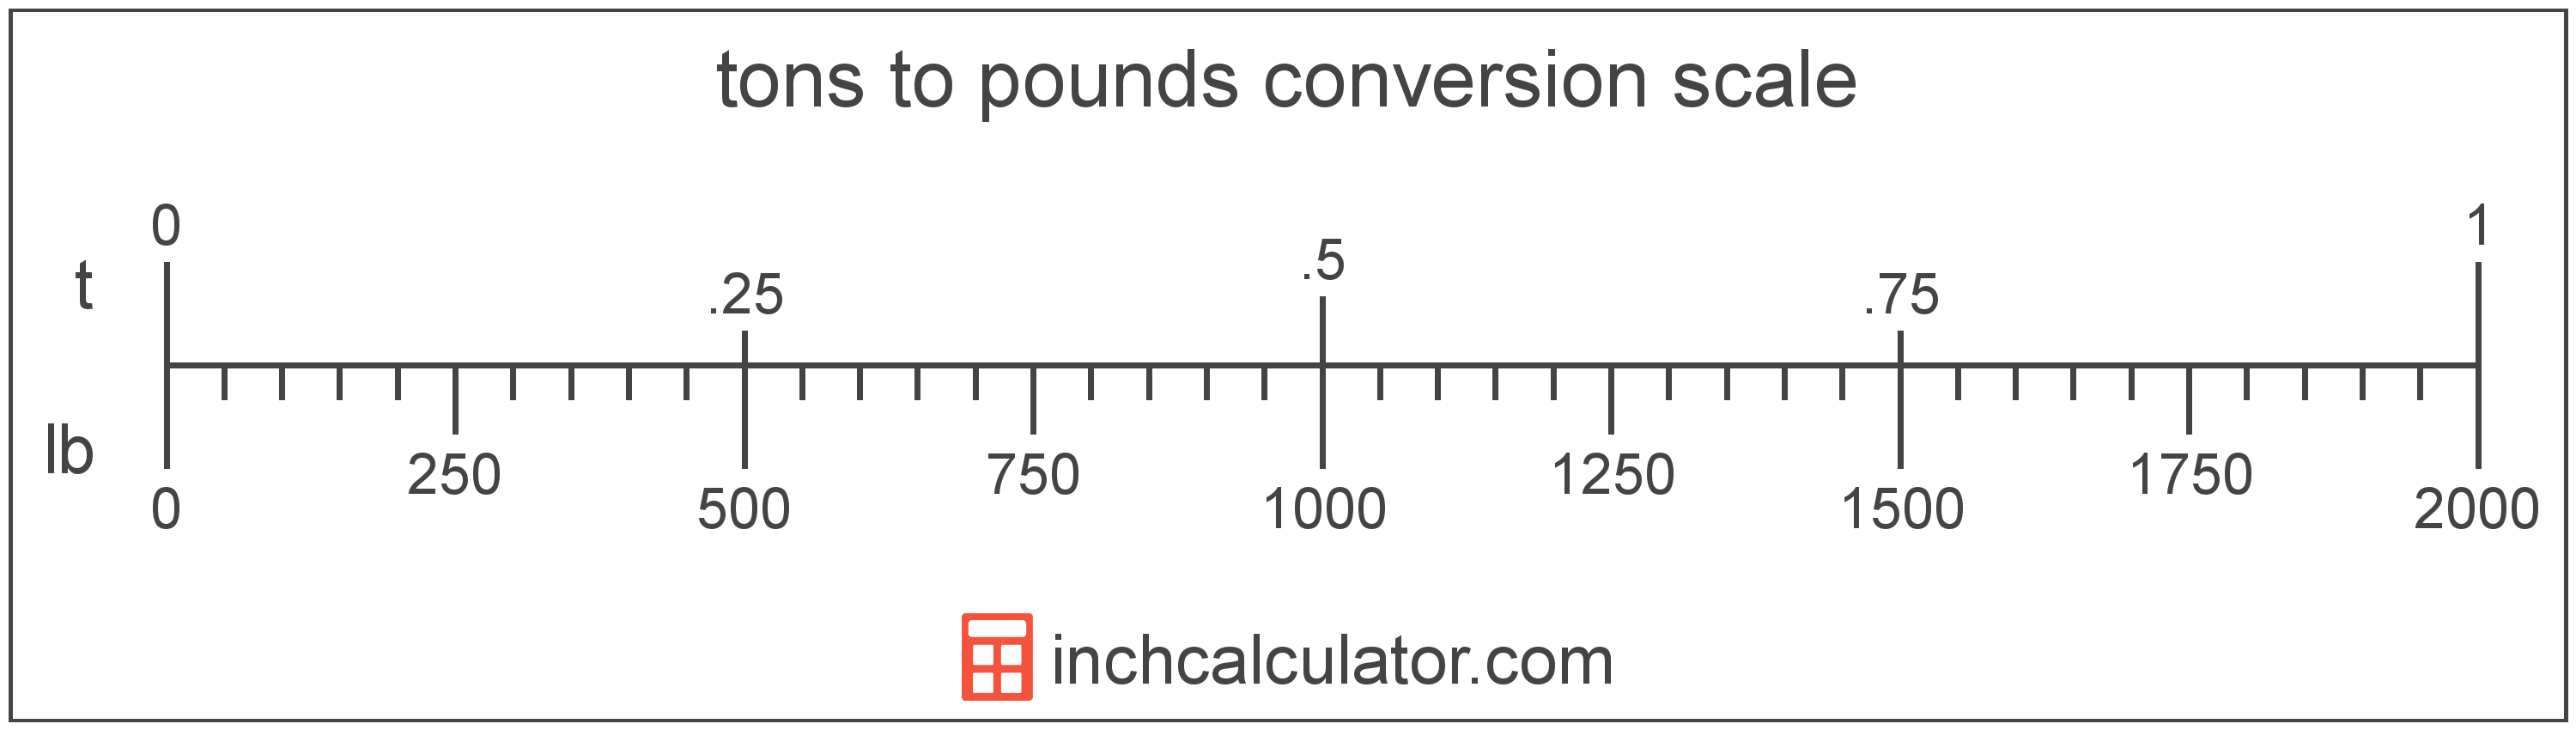 Conversion Chart Pounds To Tons